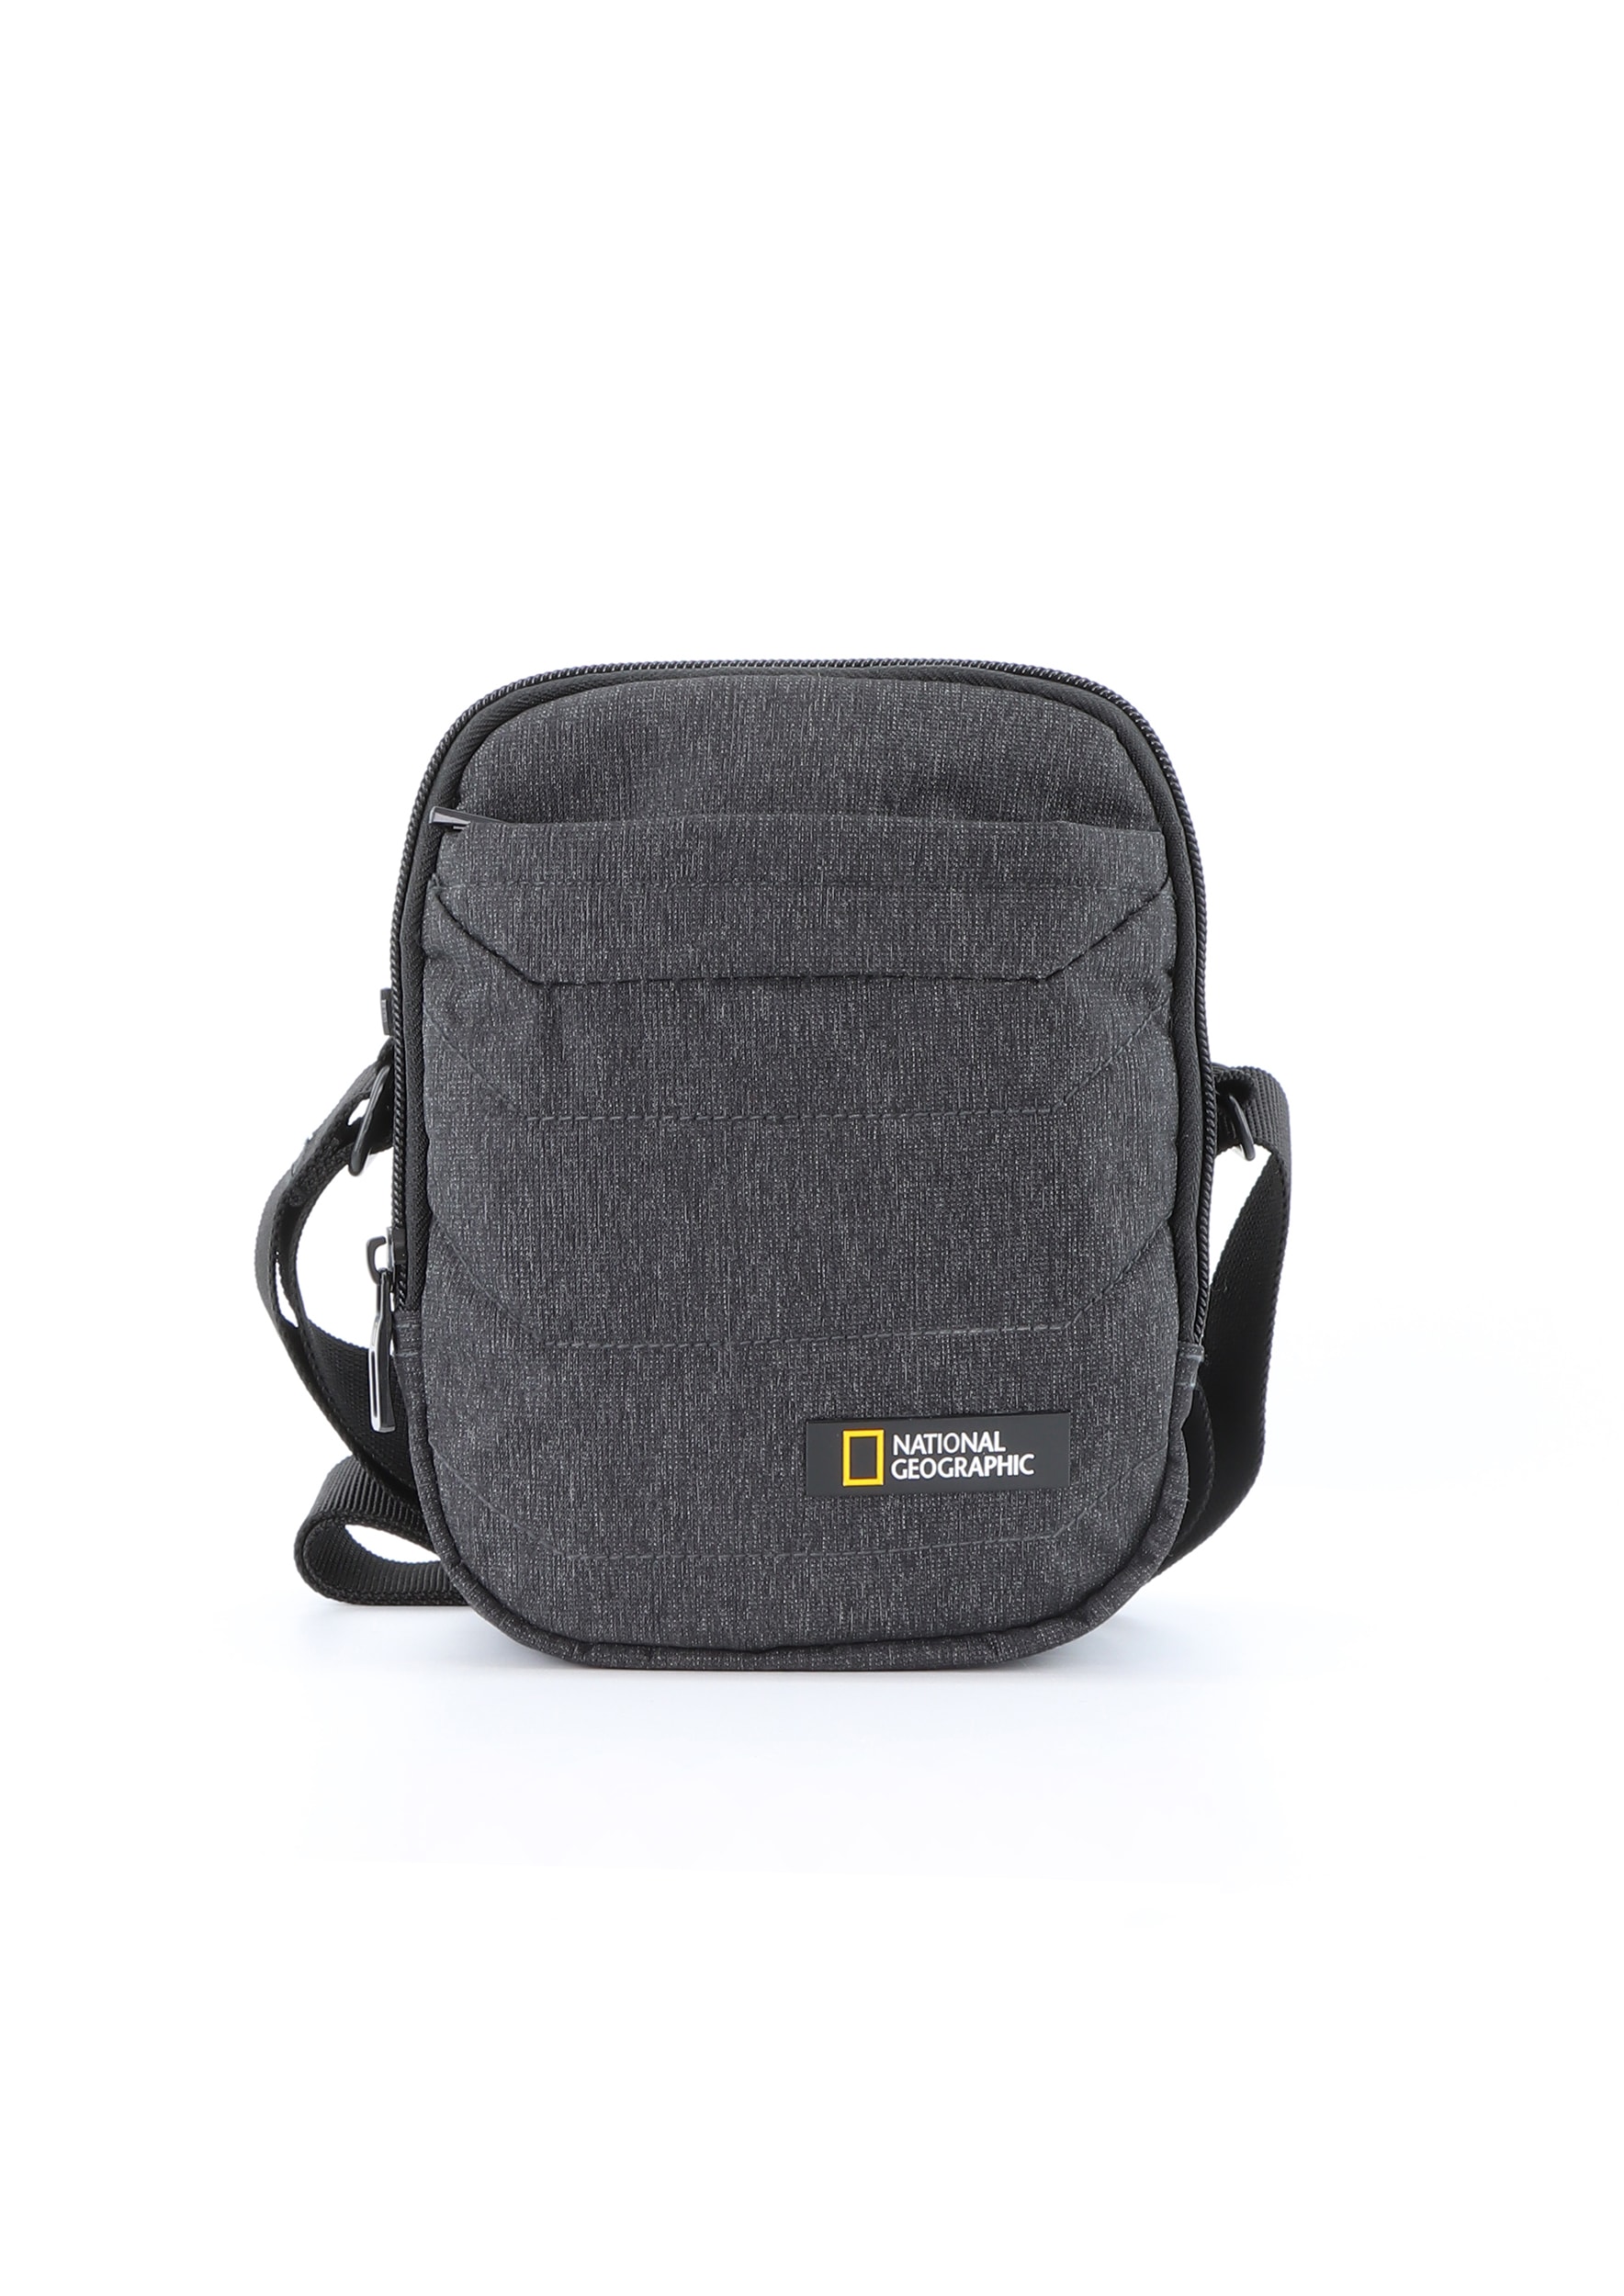 NATIONAL GEOGRAPHIC Schultertasche "Pro", in praktischer Größe von National Geographic